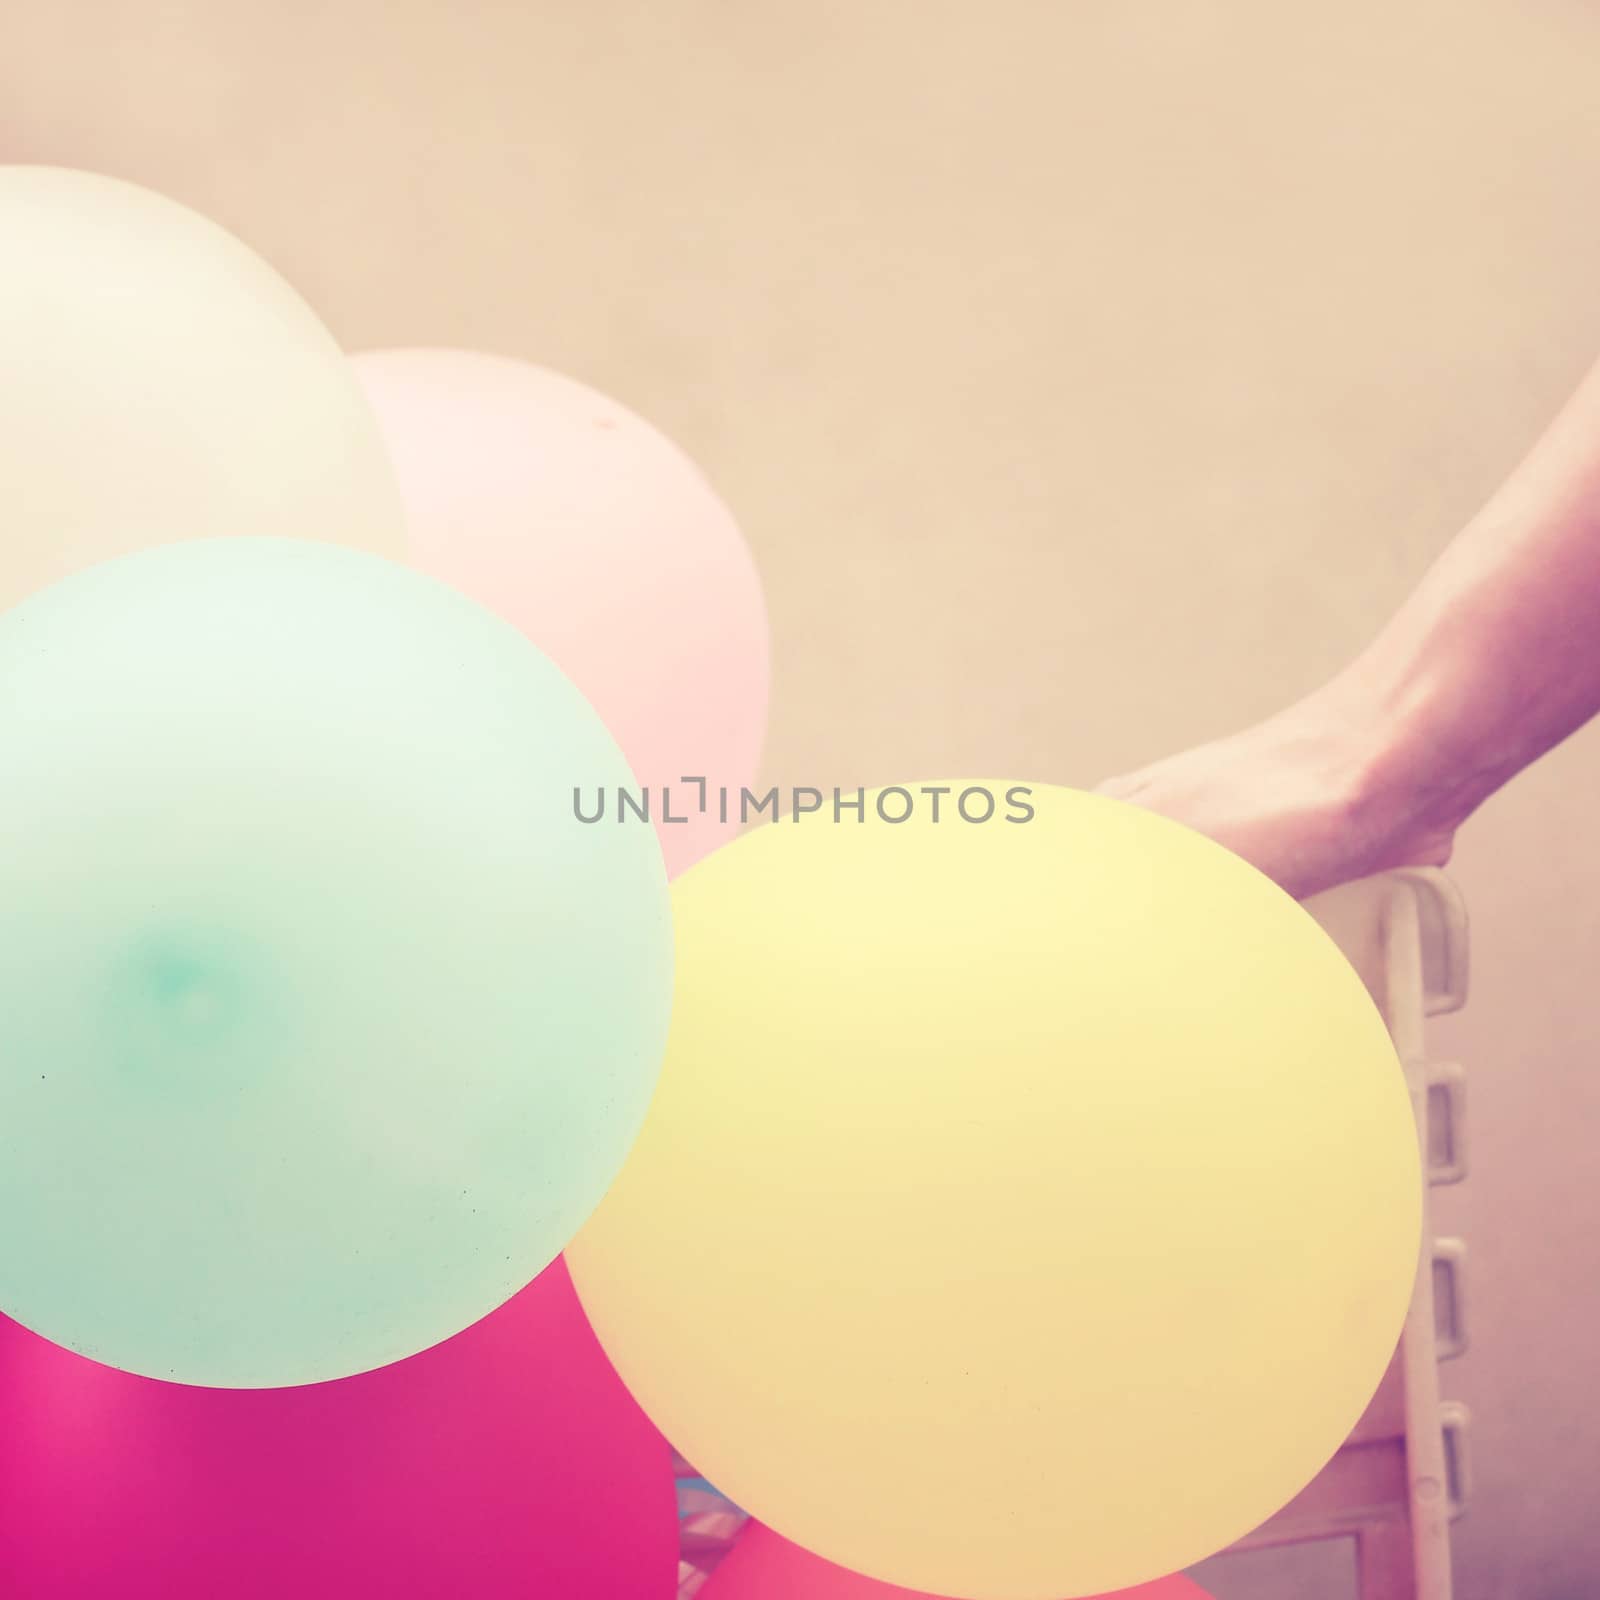 Colorful balloons with hand on chair, retro filter effect